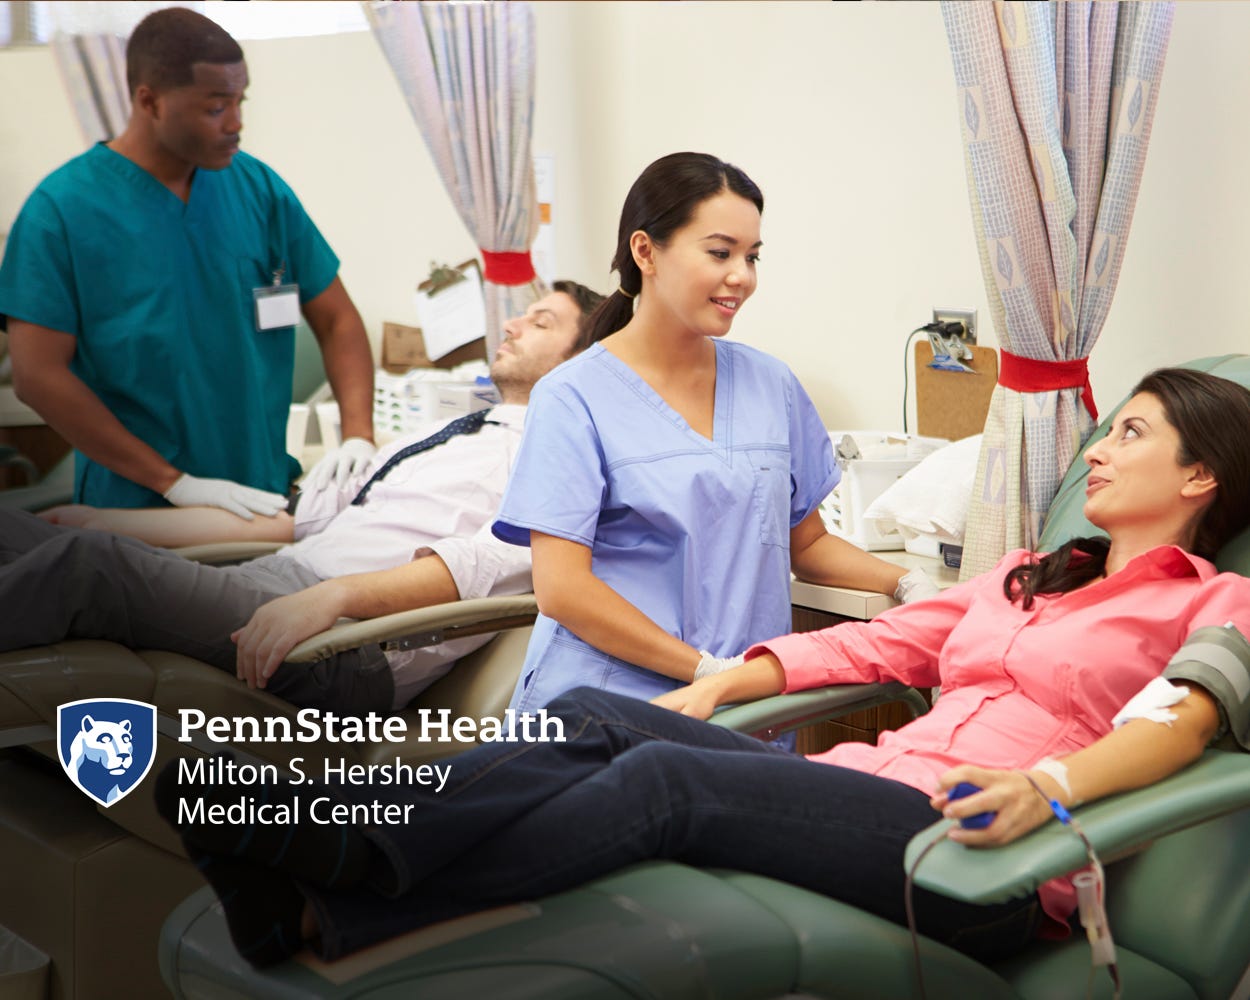 Blood donation. Penn State Health Medical Minute by Penn